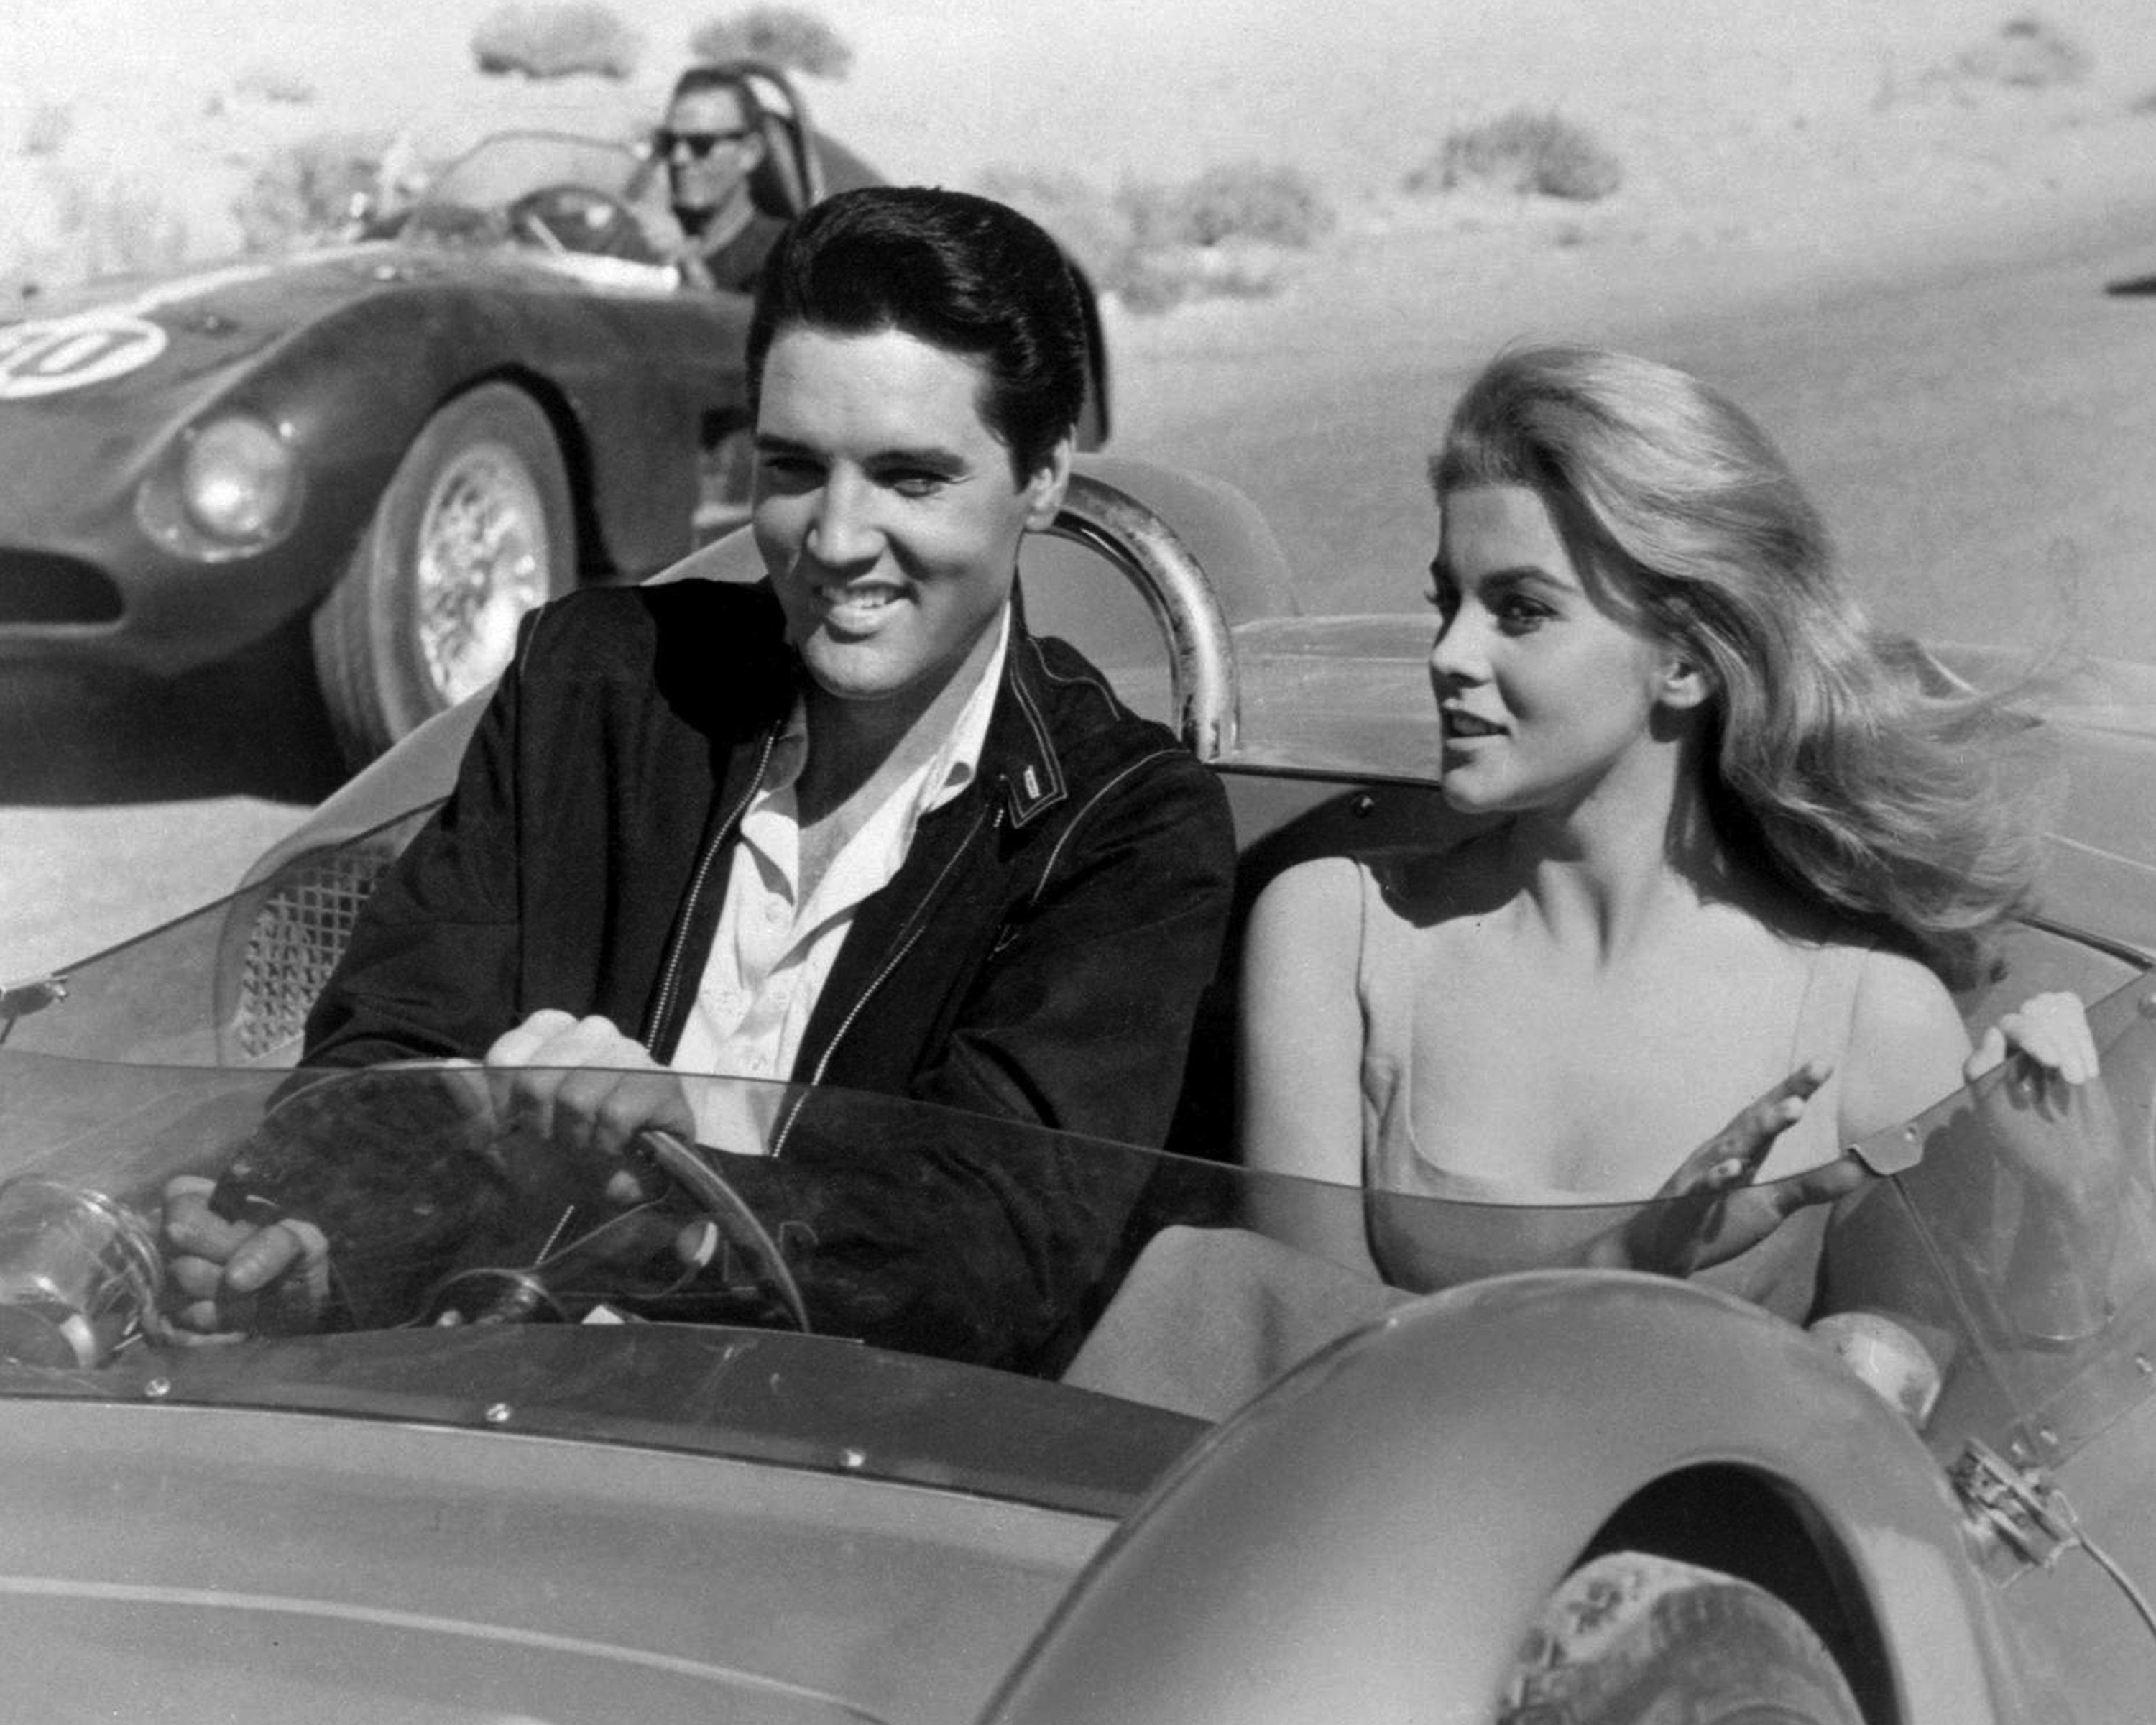 Ann-Margret and Elvis Presley in a car